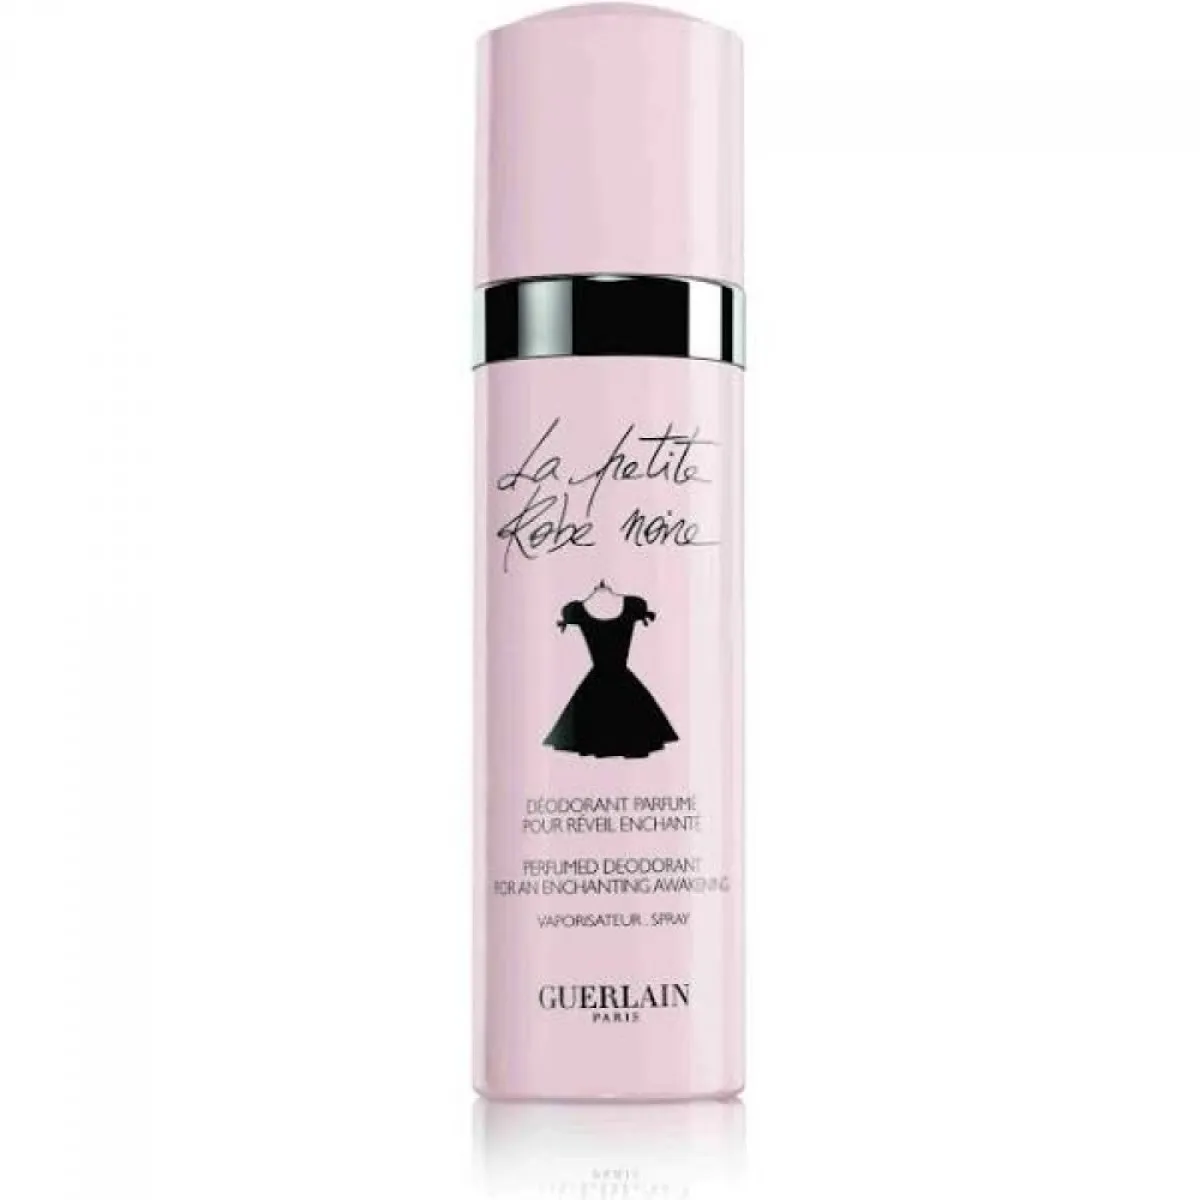 La Petite Robe Noire by Guerlain, one of the best French deodorant sprays by a luxury designer brand.